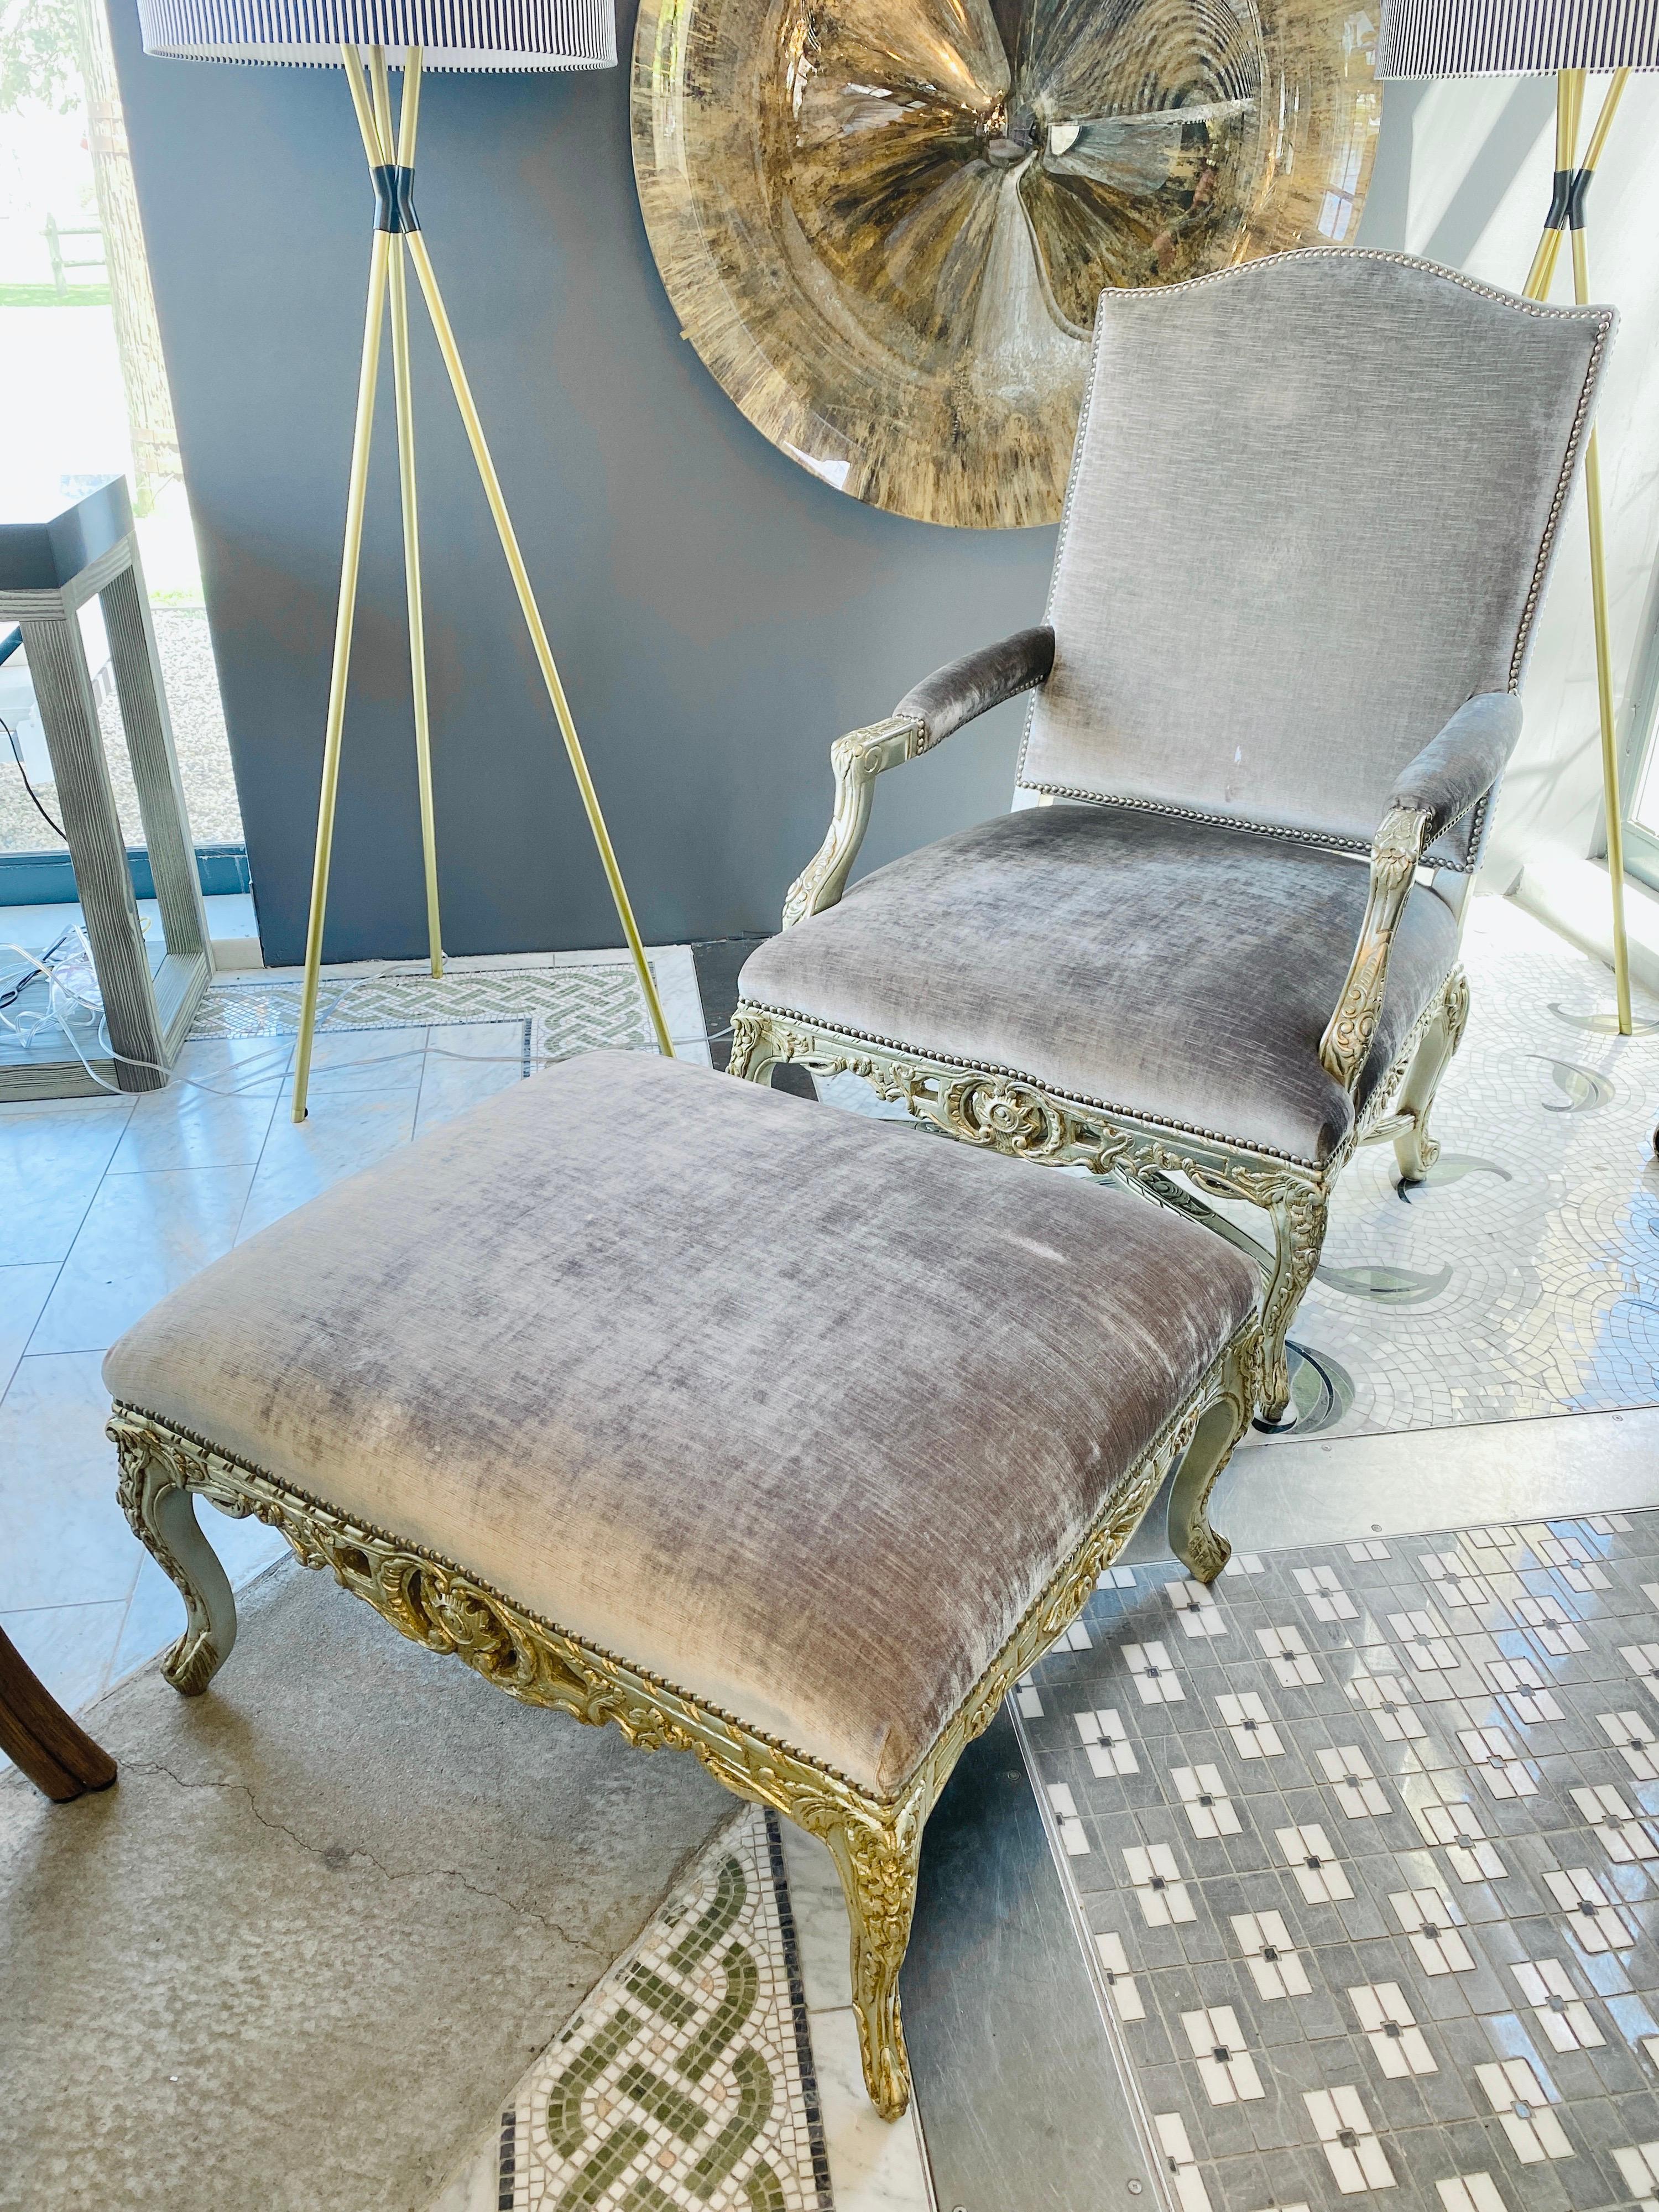 Ralph Lauren grey velvet and silver leaf chair and ottoman with nailhead trim.

Ottoman dimensions are 28